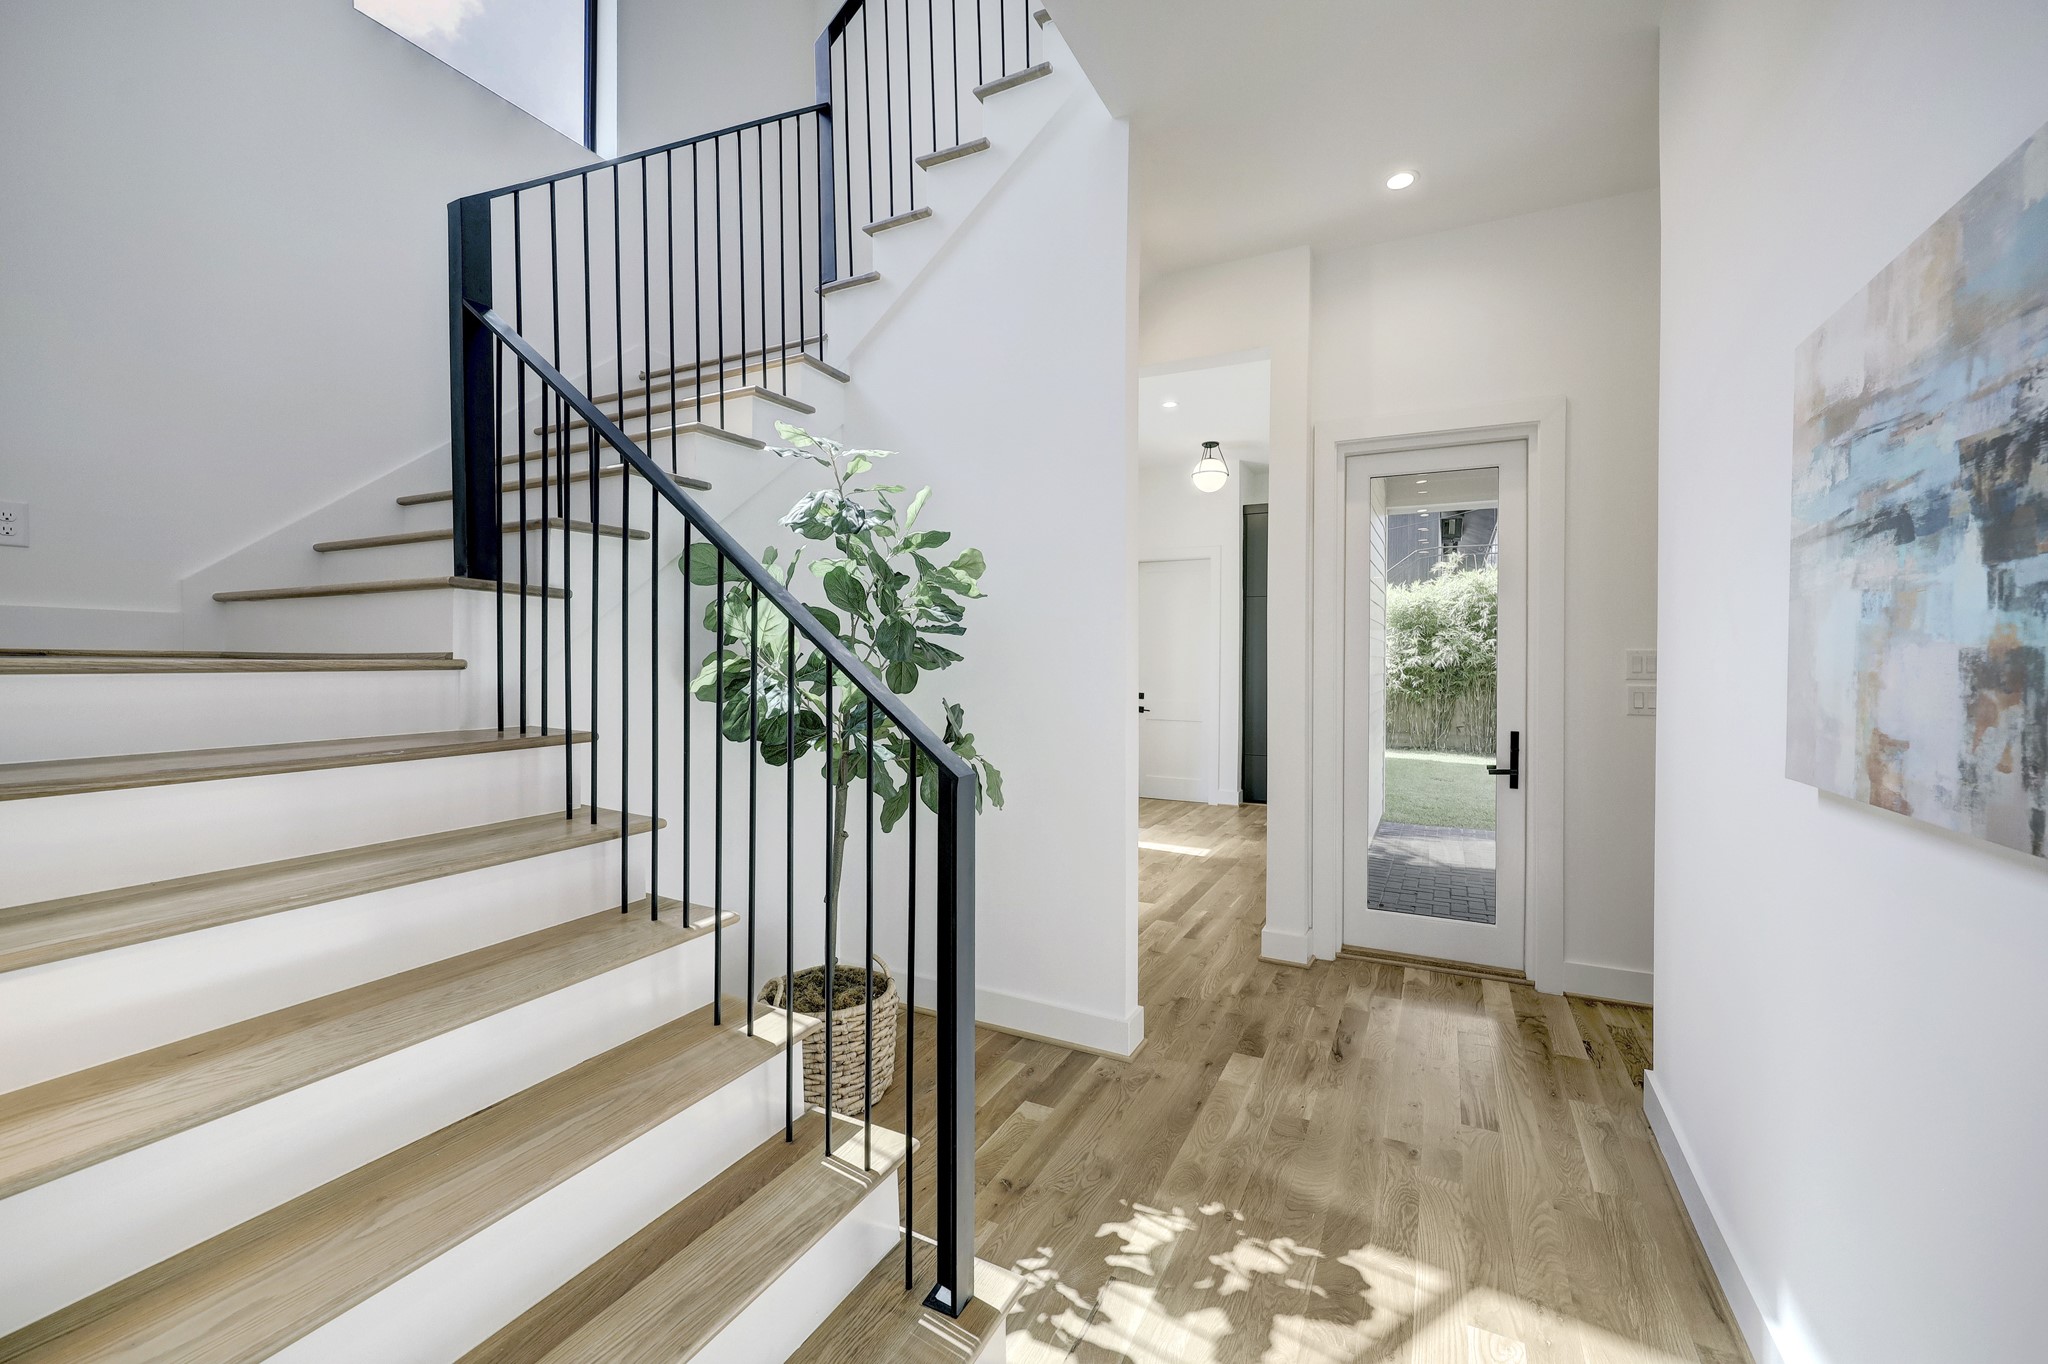 Gorgeous custom-stained natural white oak hardwood flooring throughout this stunning residence